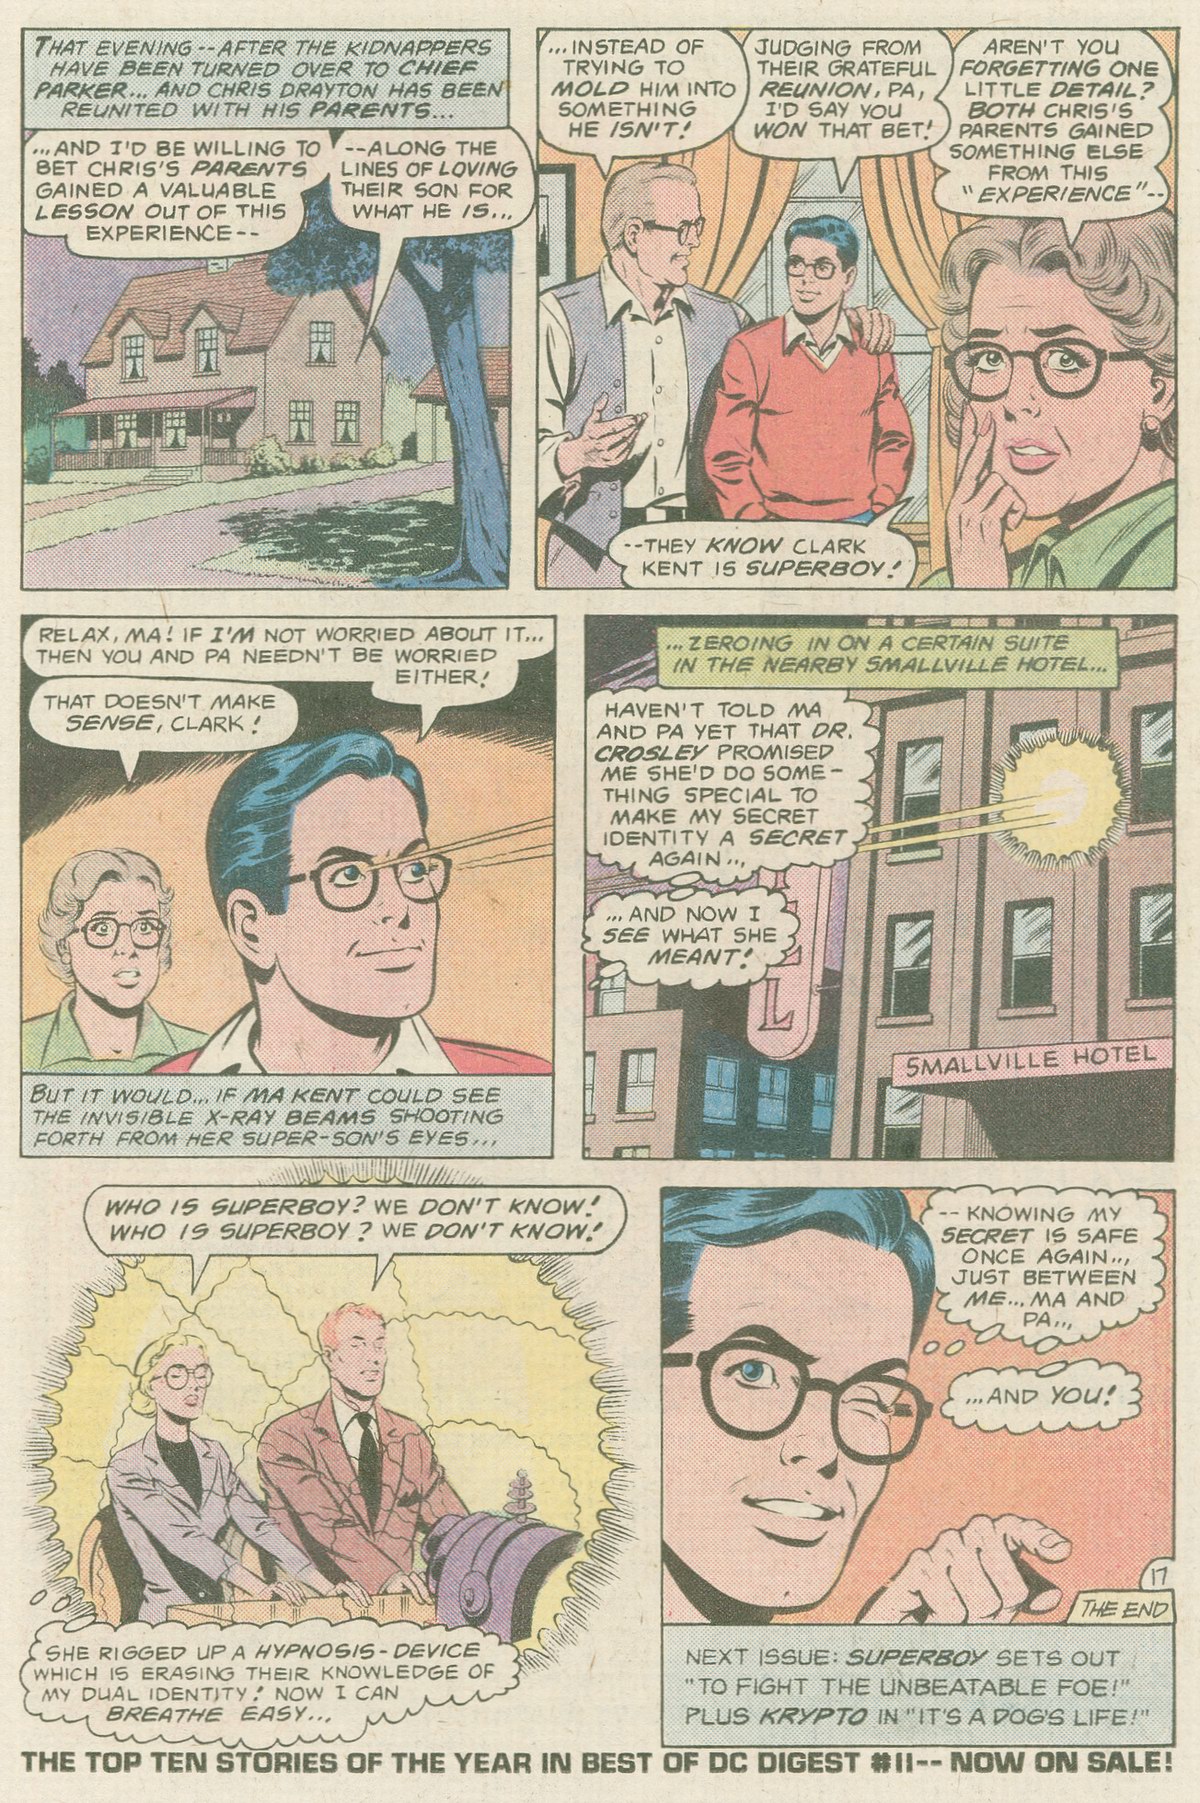 The New Adventures of Superboy 16 Page 17